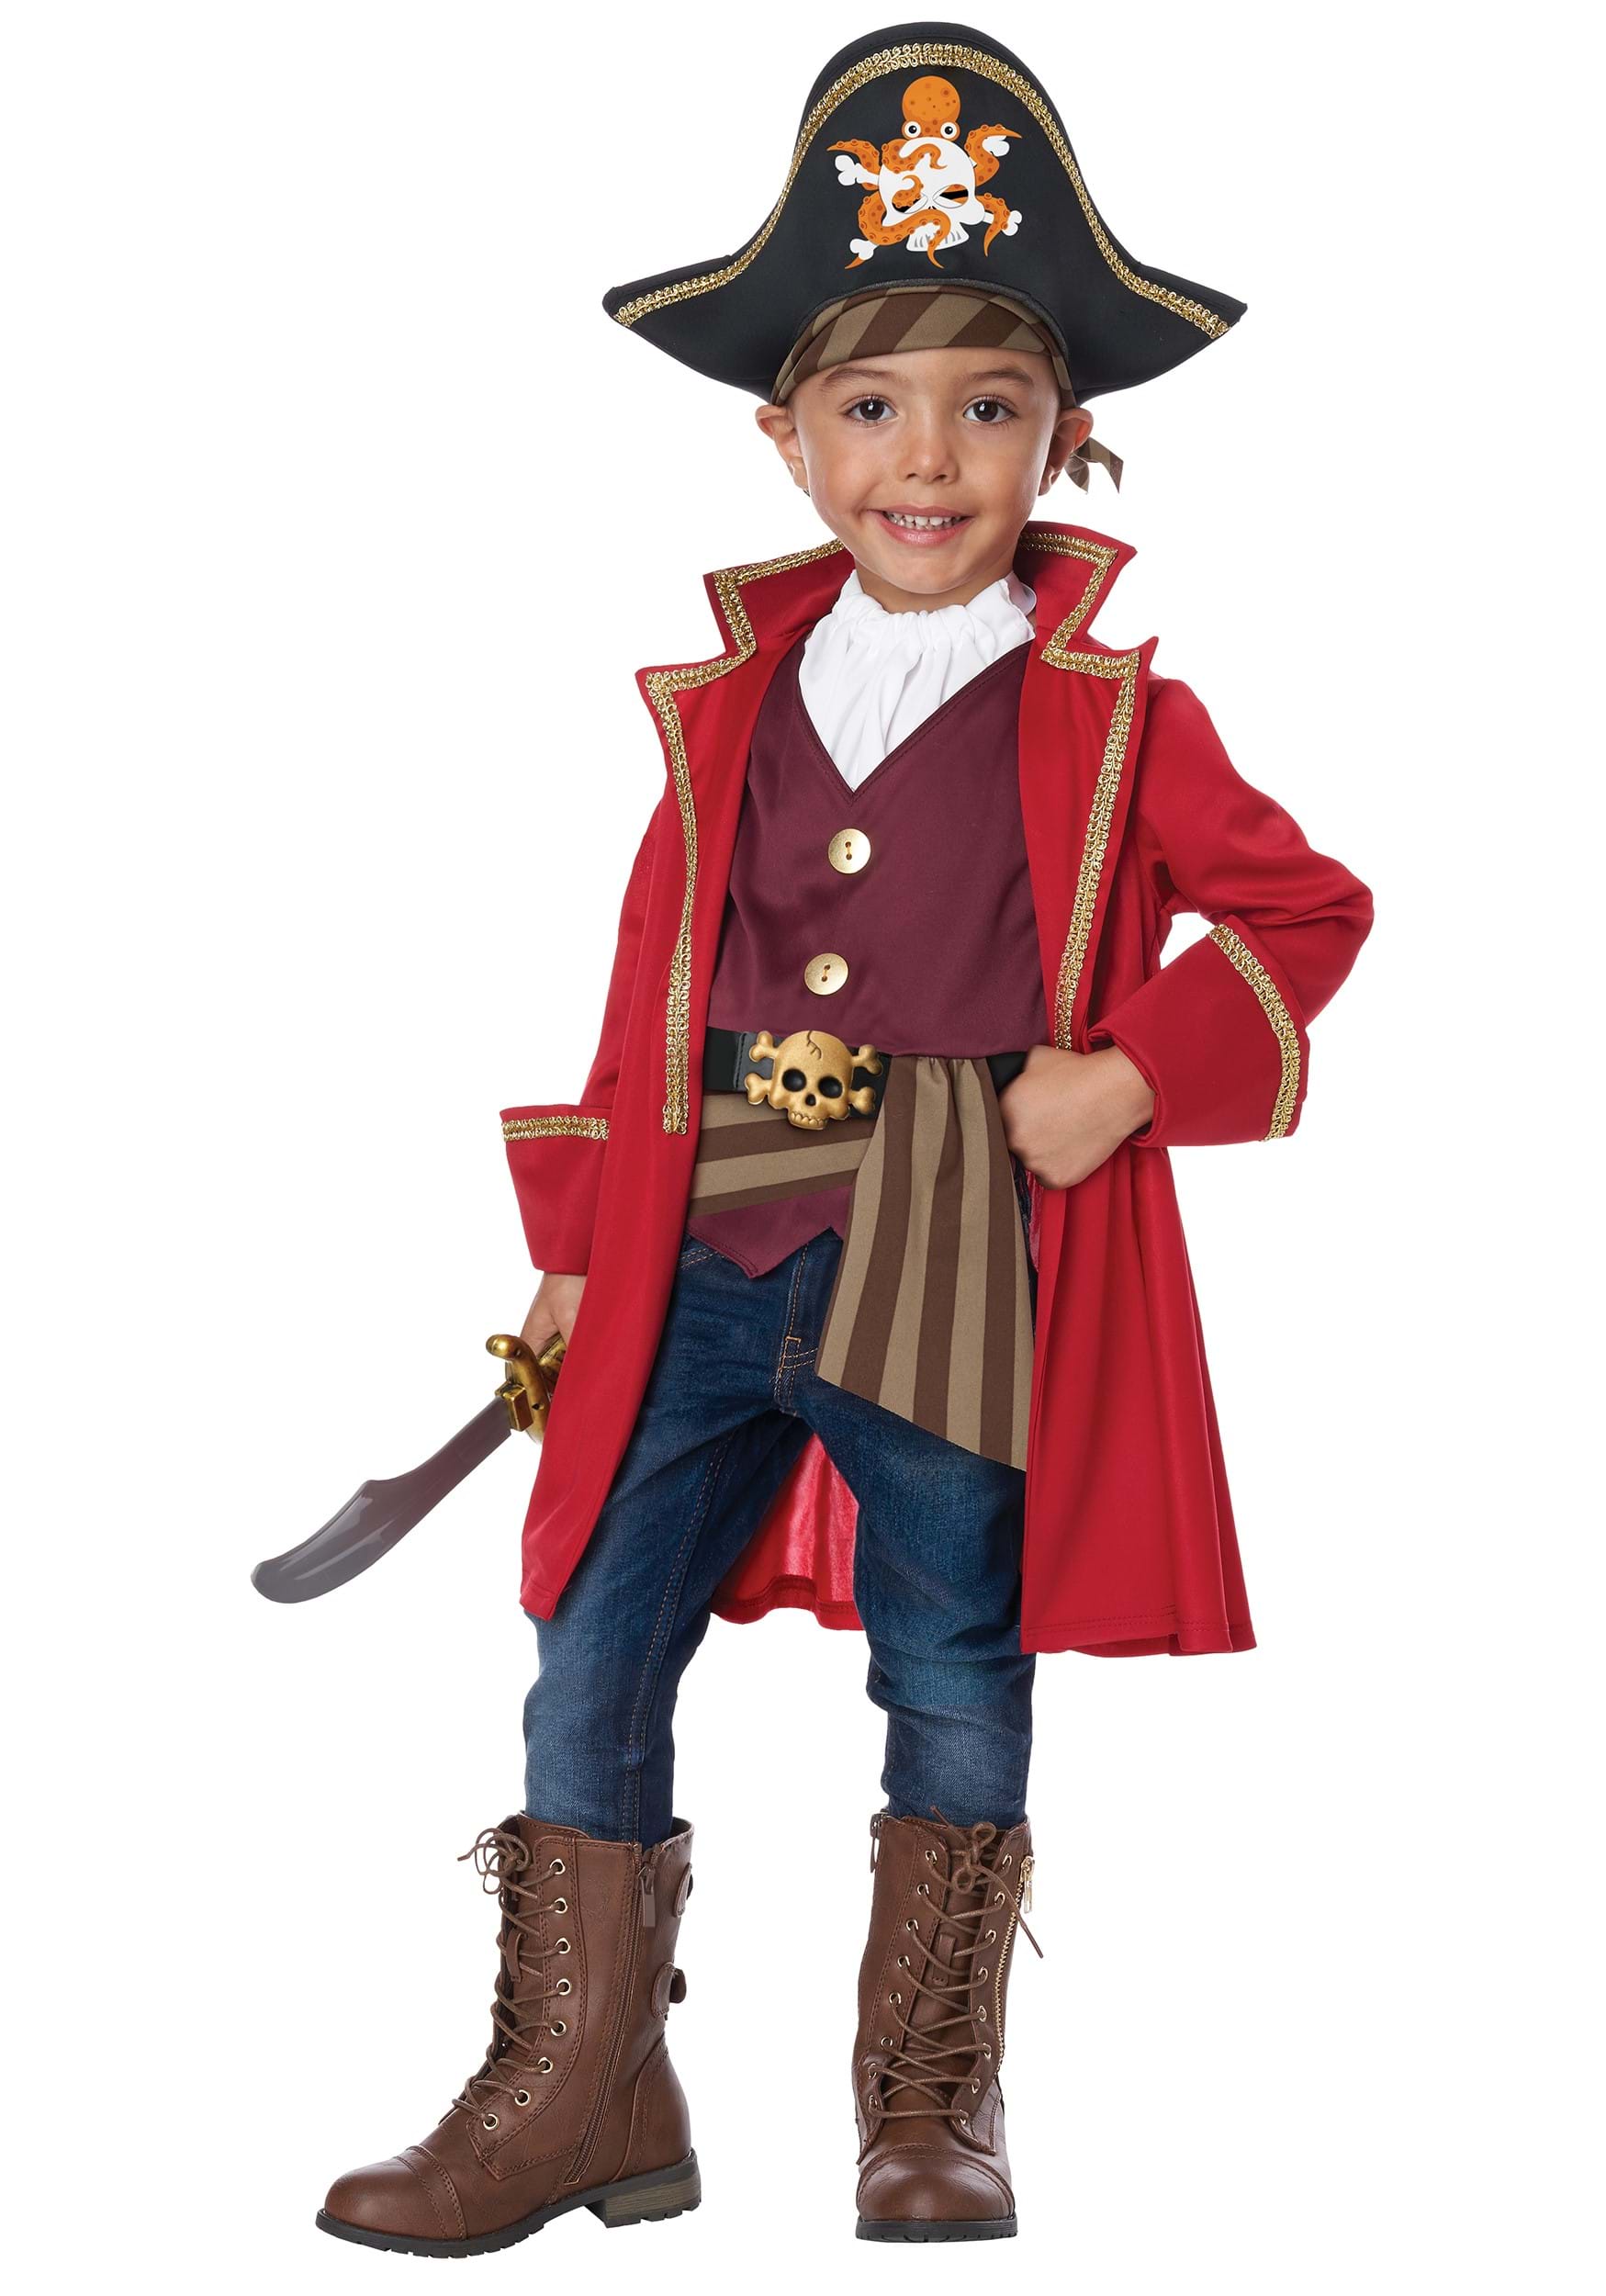 Capn Shorty Pirate Costume for Toddlers